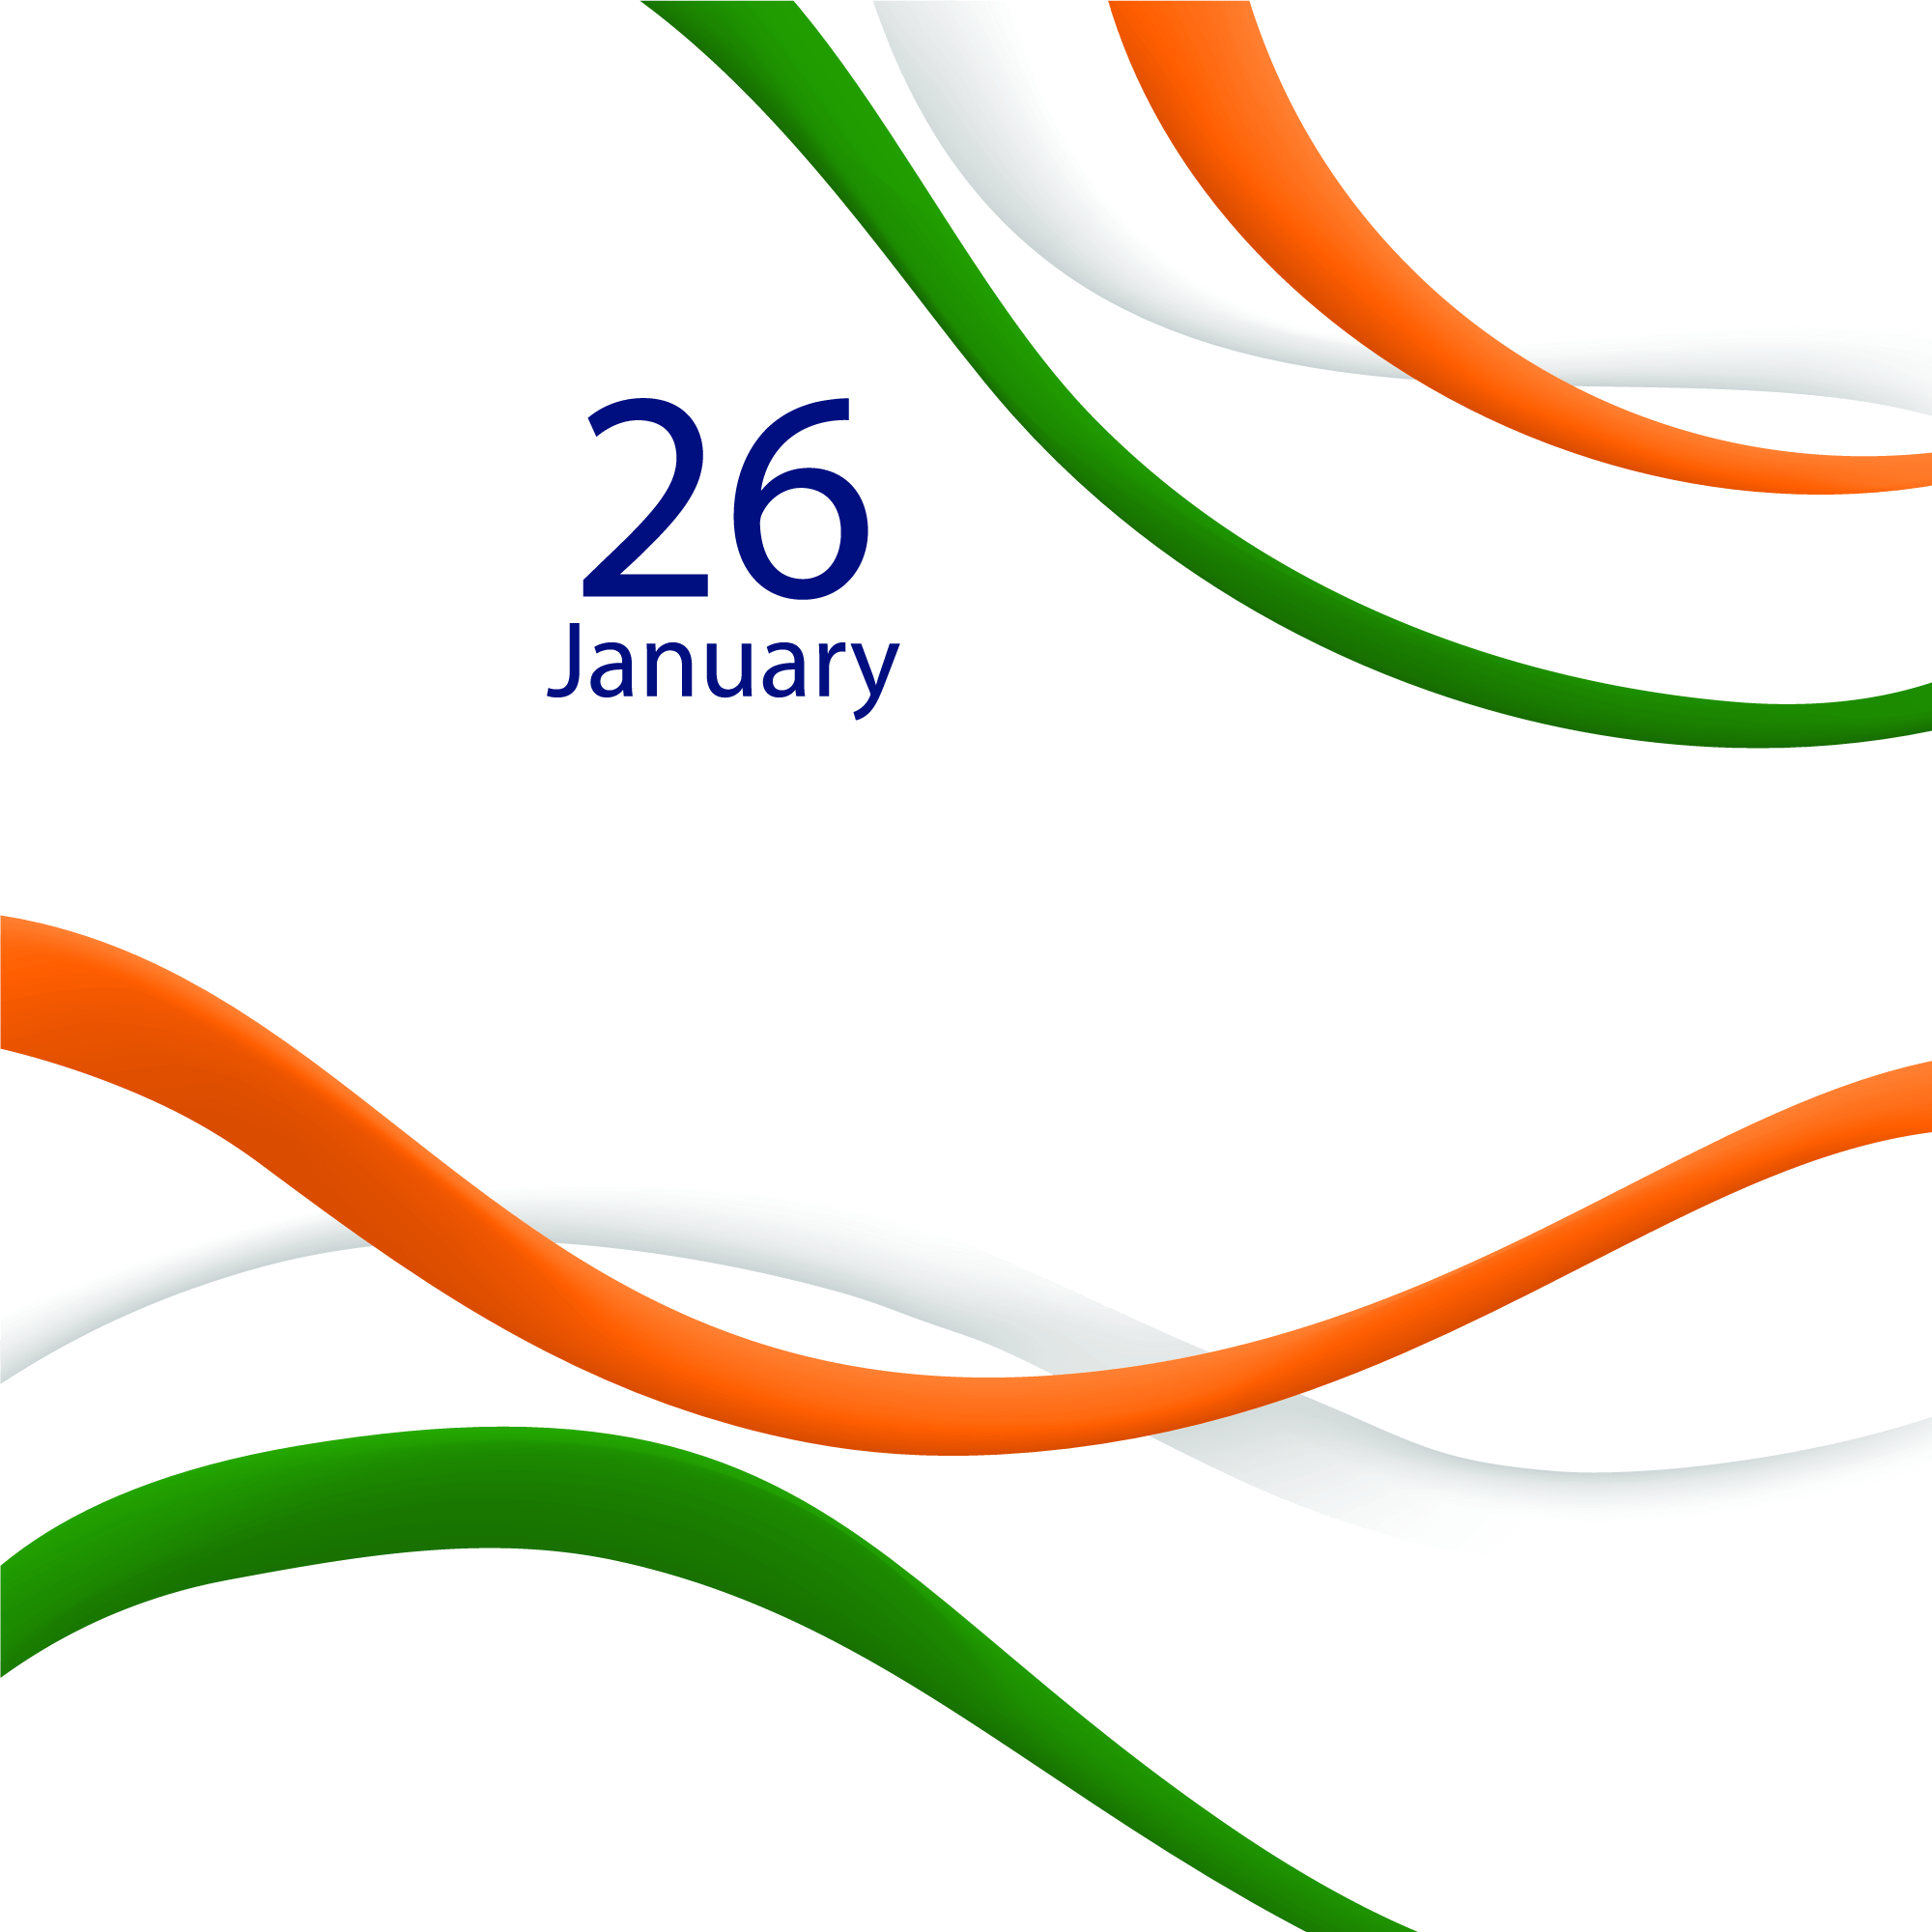 January 26 happy republic day design png image - Pngfreepic